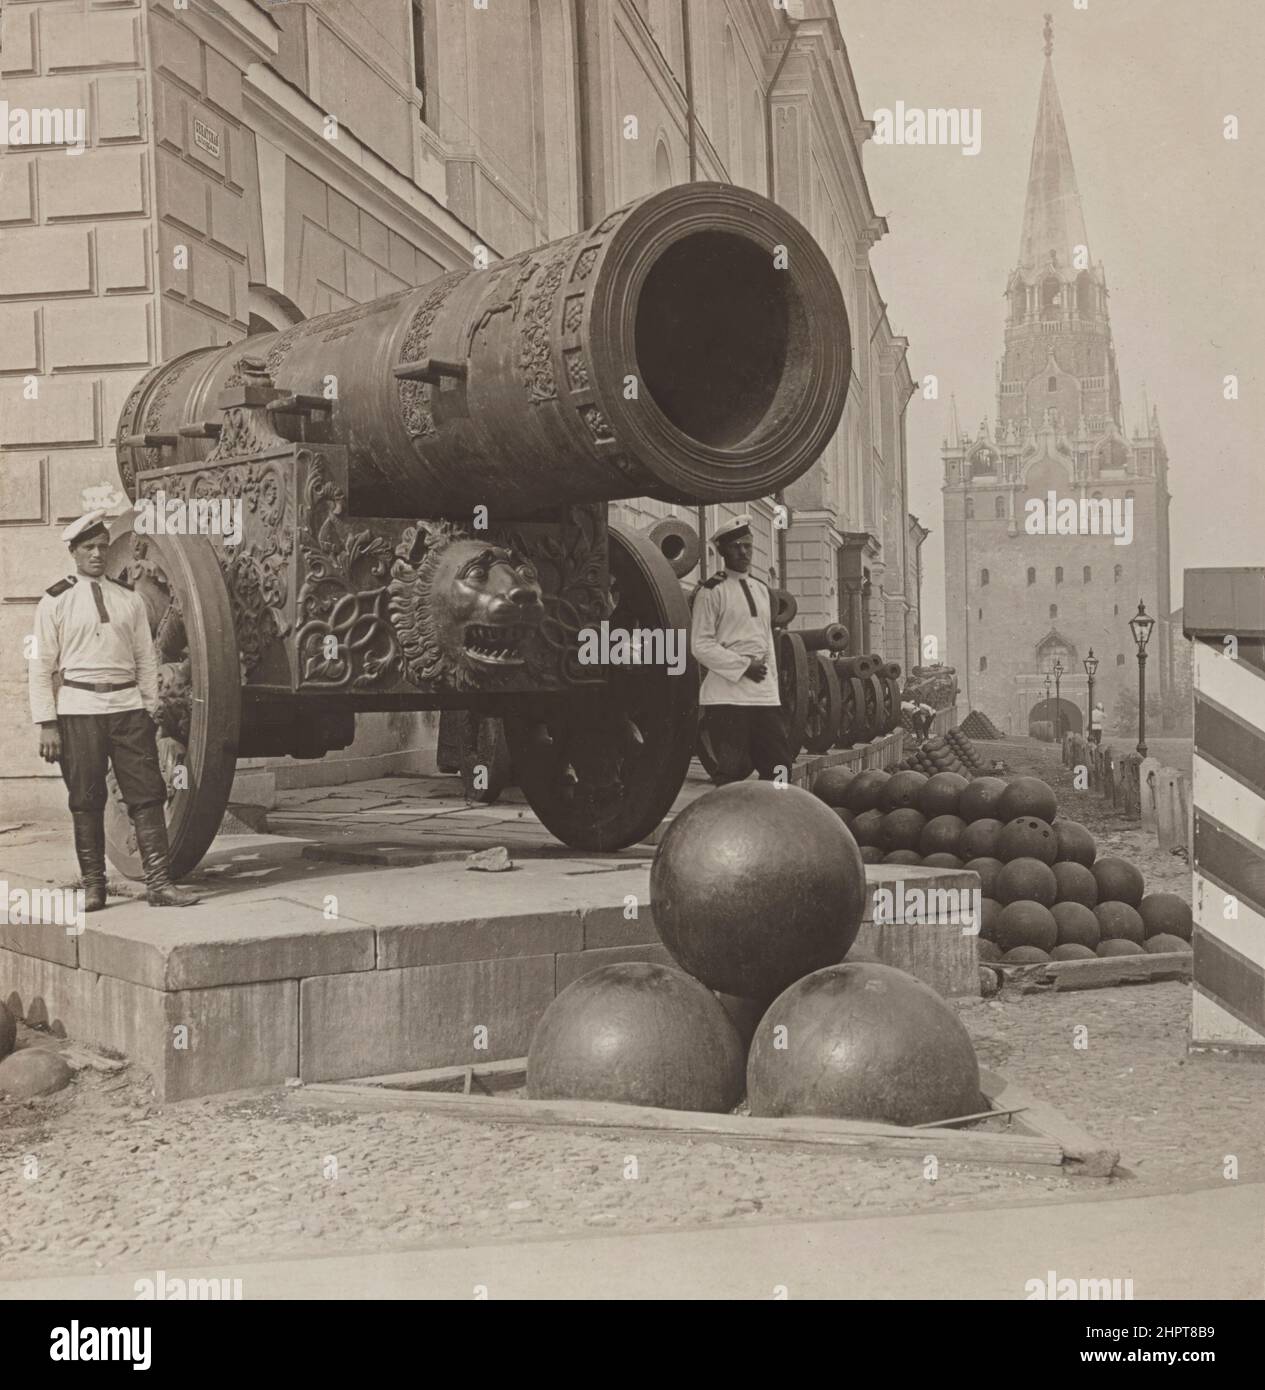 Vintage photo of Tsar Cannon in the Moscow Kremlin. Russian Empire. 1900s The Tsar Cannon is a large early modern period artillery piece (known as a b Stock Photo